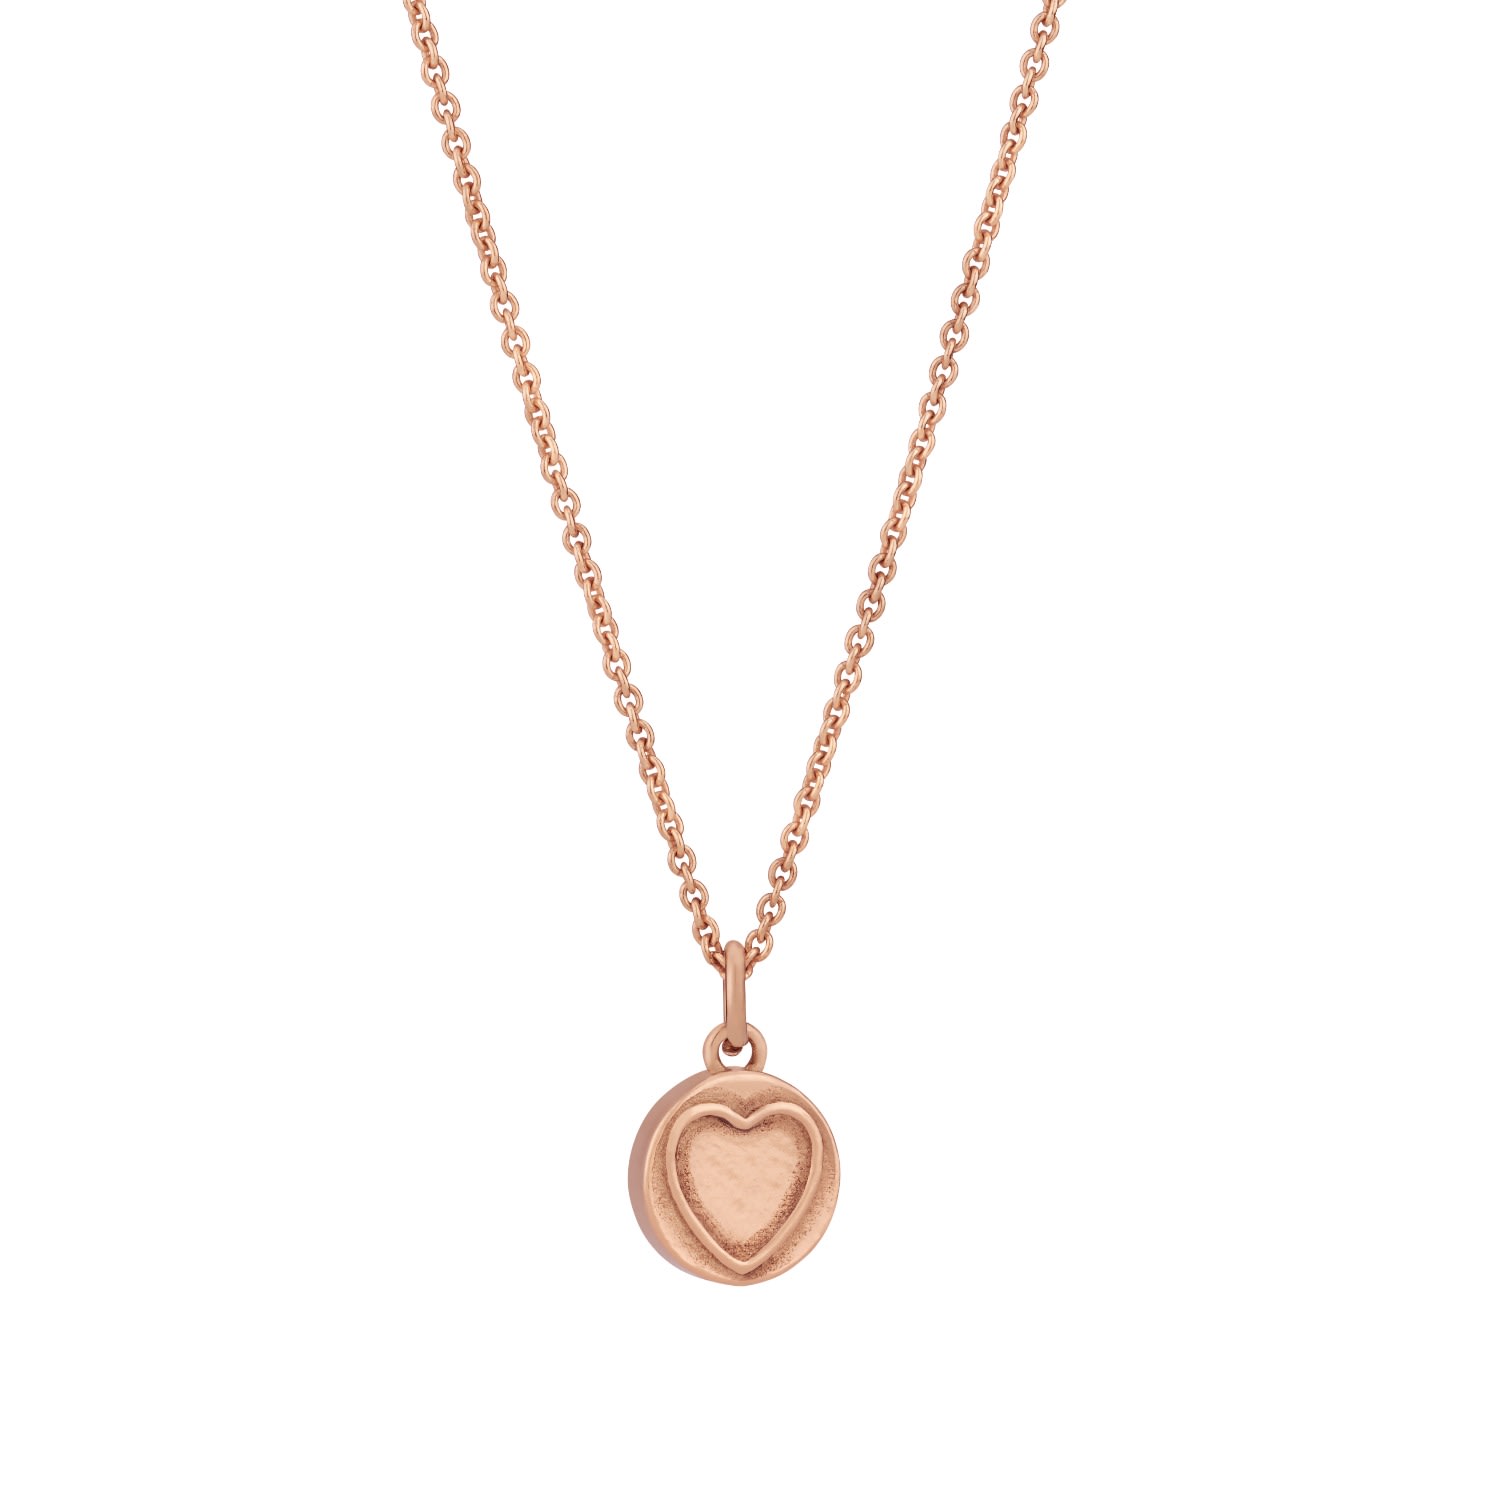 Women’s Rose Gold Plated Mini Personalised Sweetheart Necklace Posh Totty Designs